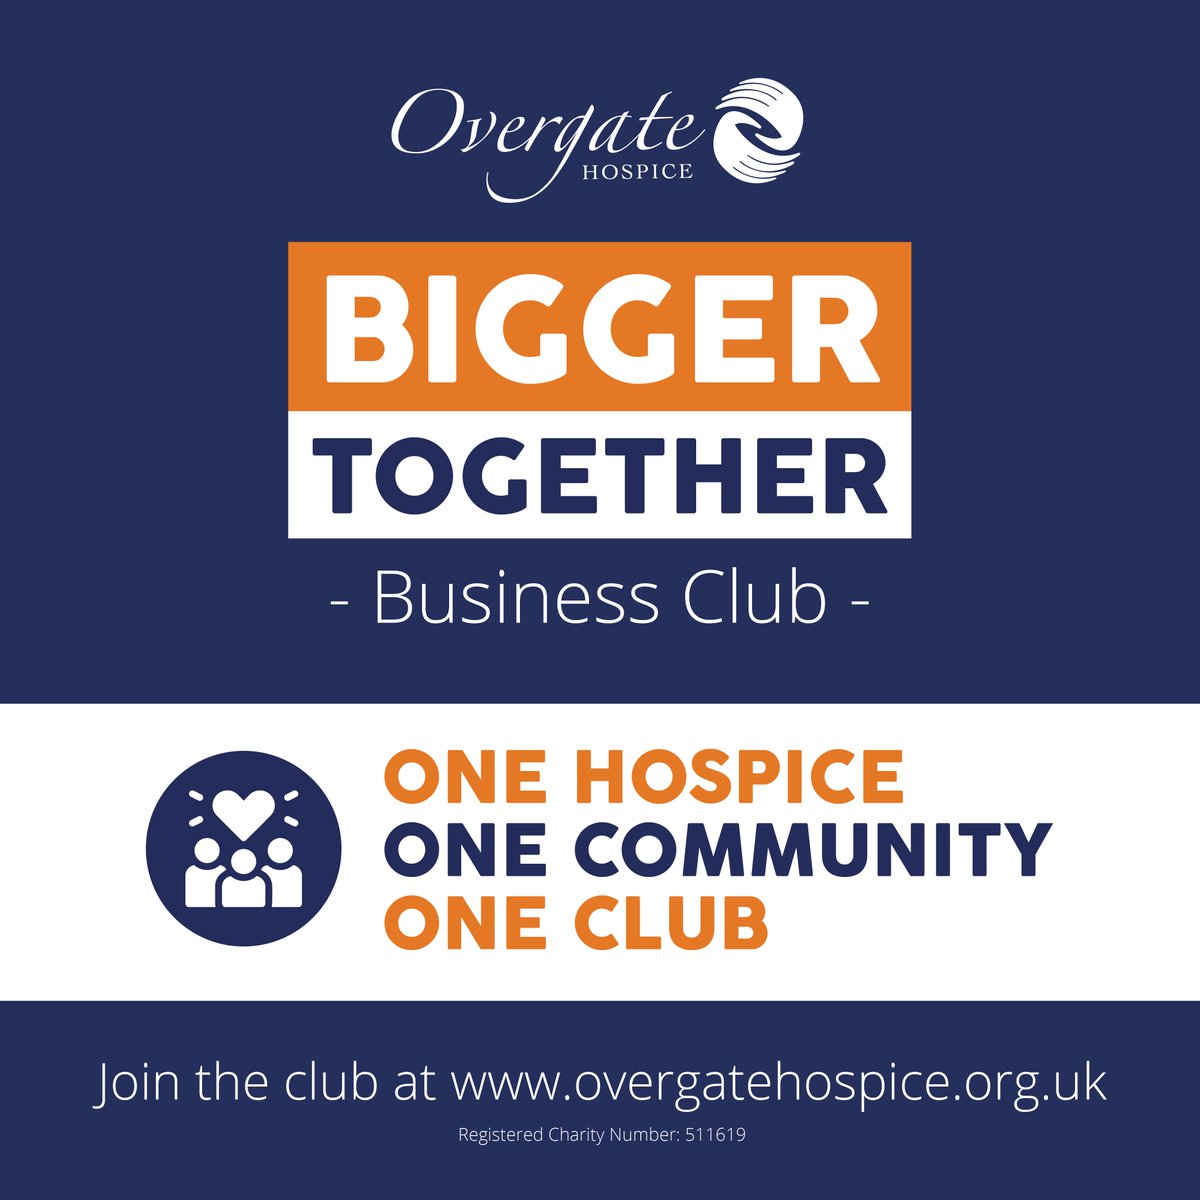 📢 CALLING ALL CALDERDALE BUSINESSES 📢 We're thrilled to announce the launch of our Bigger Together Business Club! Join us in shaping the future of end-of-life care in Calderdale by becoming a part of this exclusive community. buff.ly/3xHaJo2